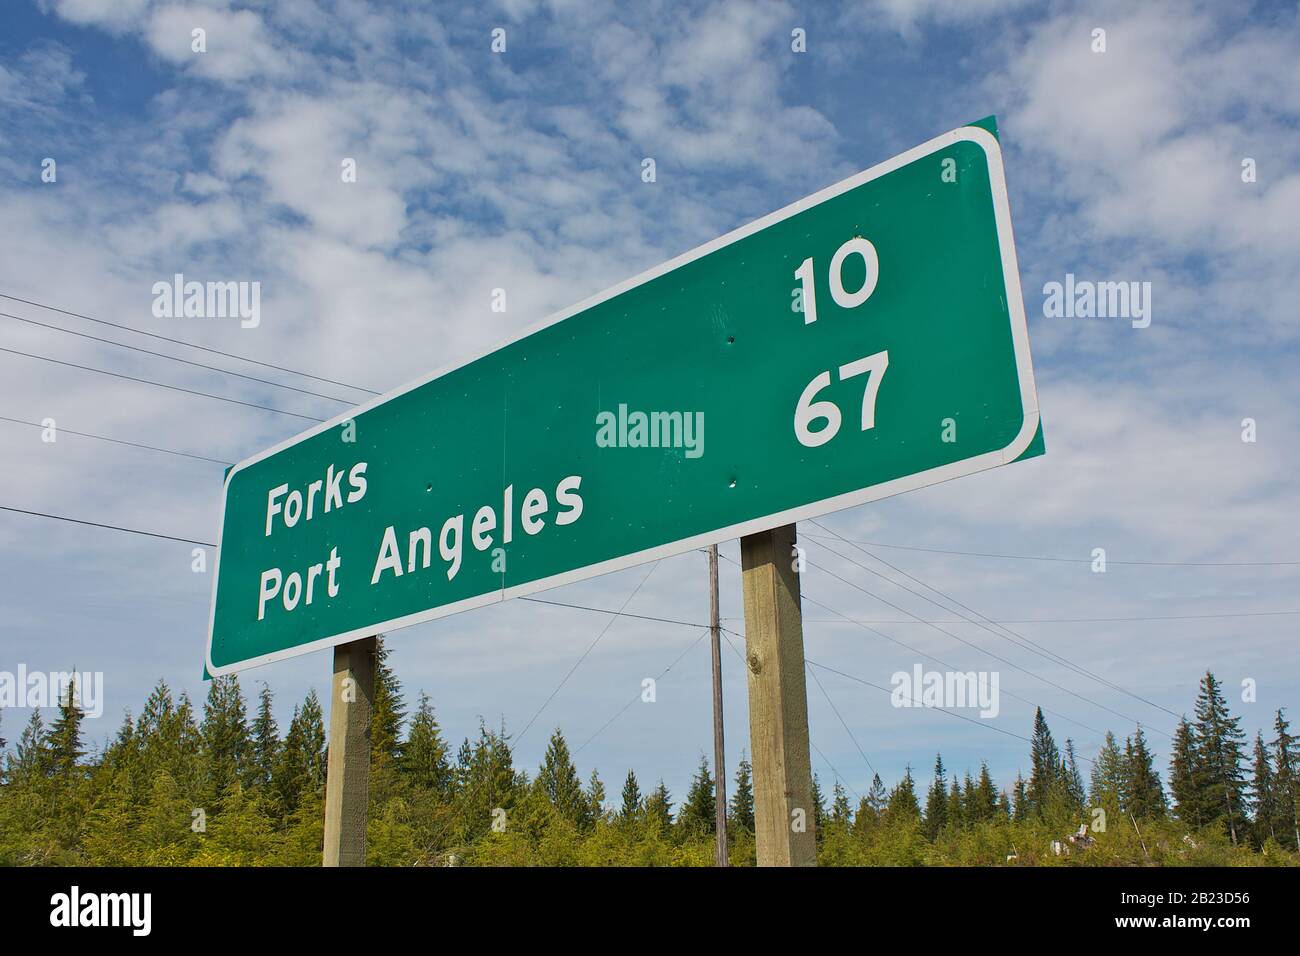 Washington, USA: Road sign to Forks and Port Angeles: Places from the famous Twilight book/movie series by Stephenie Meyer Stock Photo